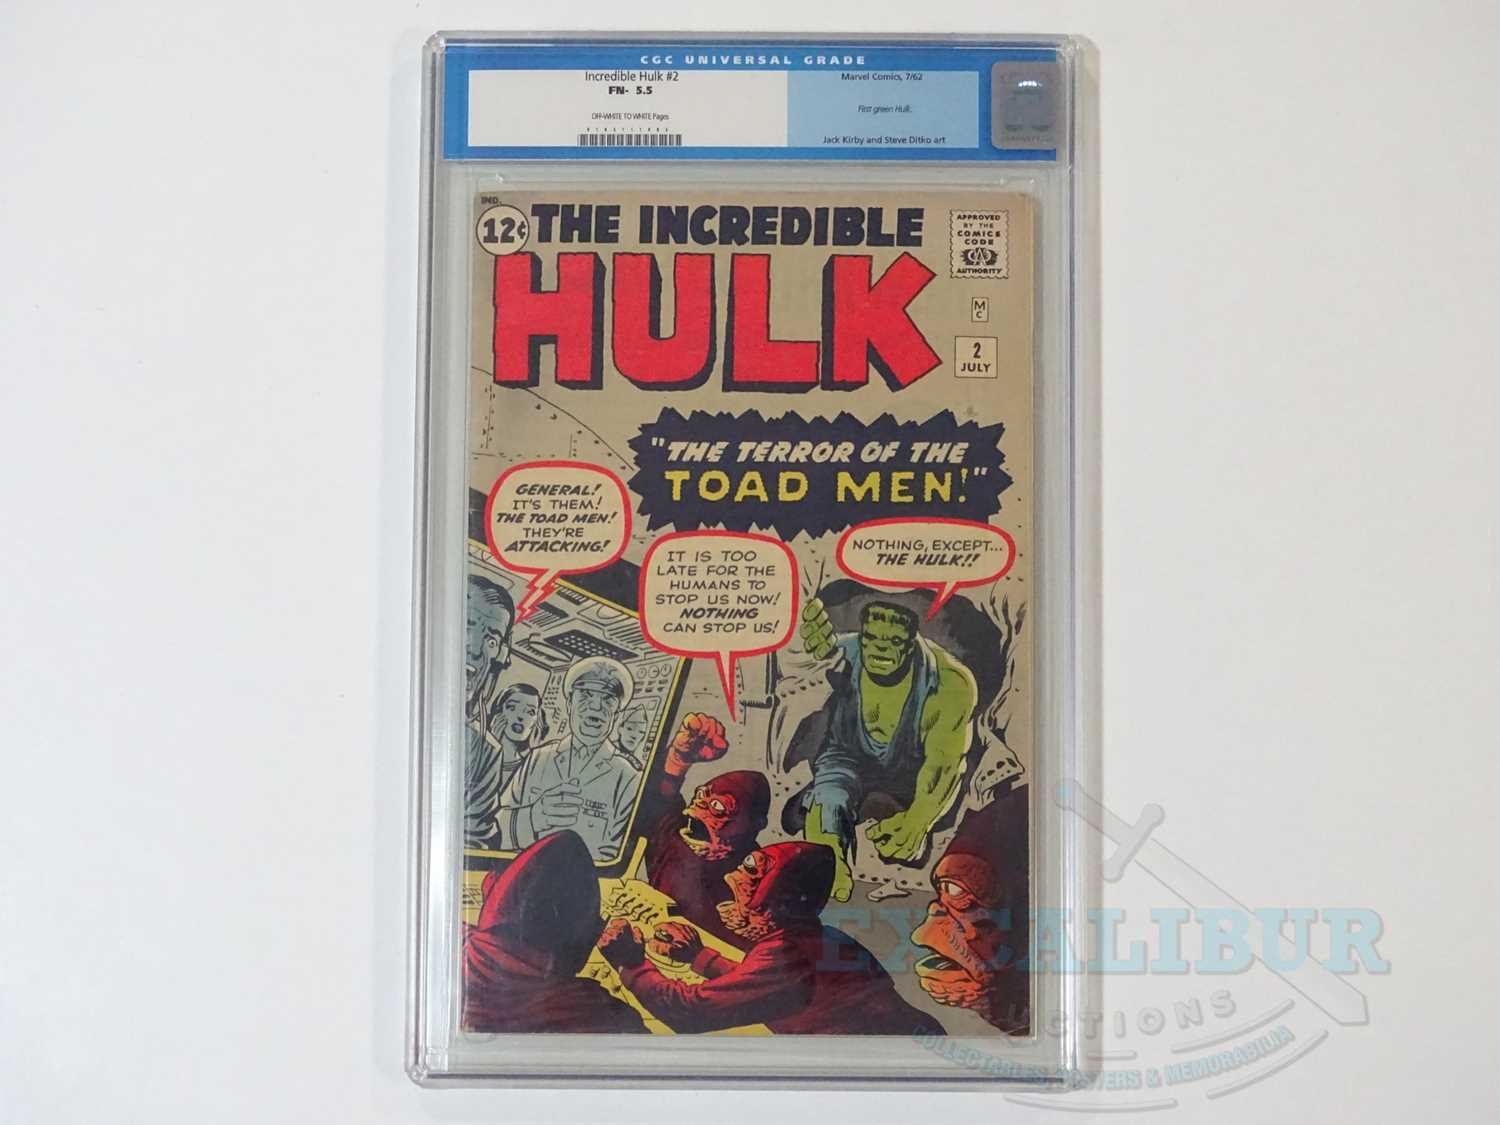 INCREDIBLE HULK #2 (1963 - MARVEL) - GRADED 5.5 (FN-) by CGC - First appearance of Green Hulk &